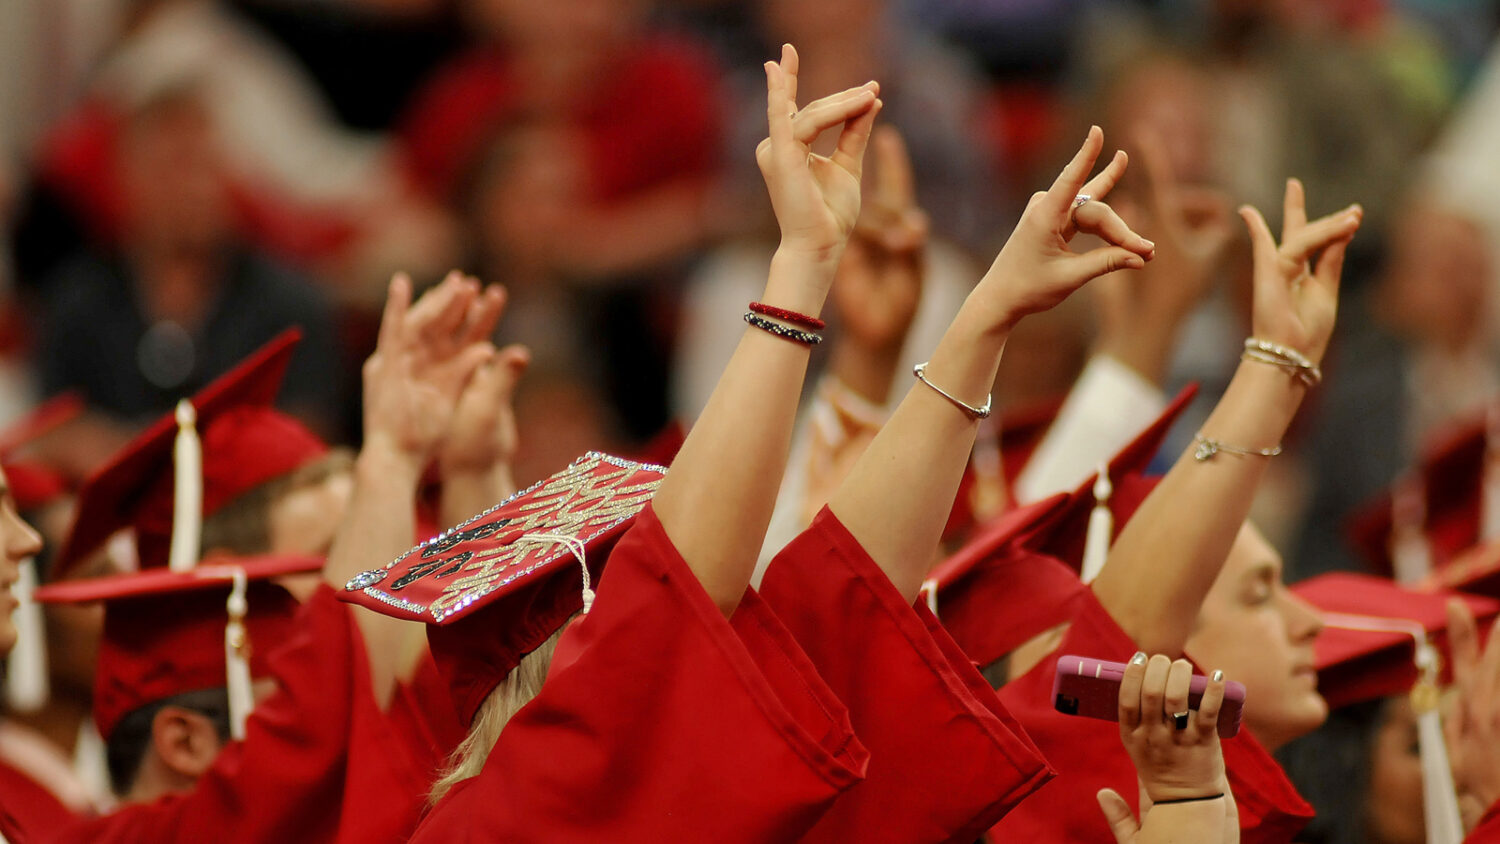 Wearing caps and gowns, students hold up the "Wolfie" sign